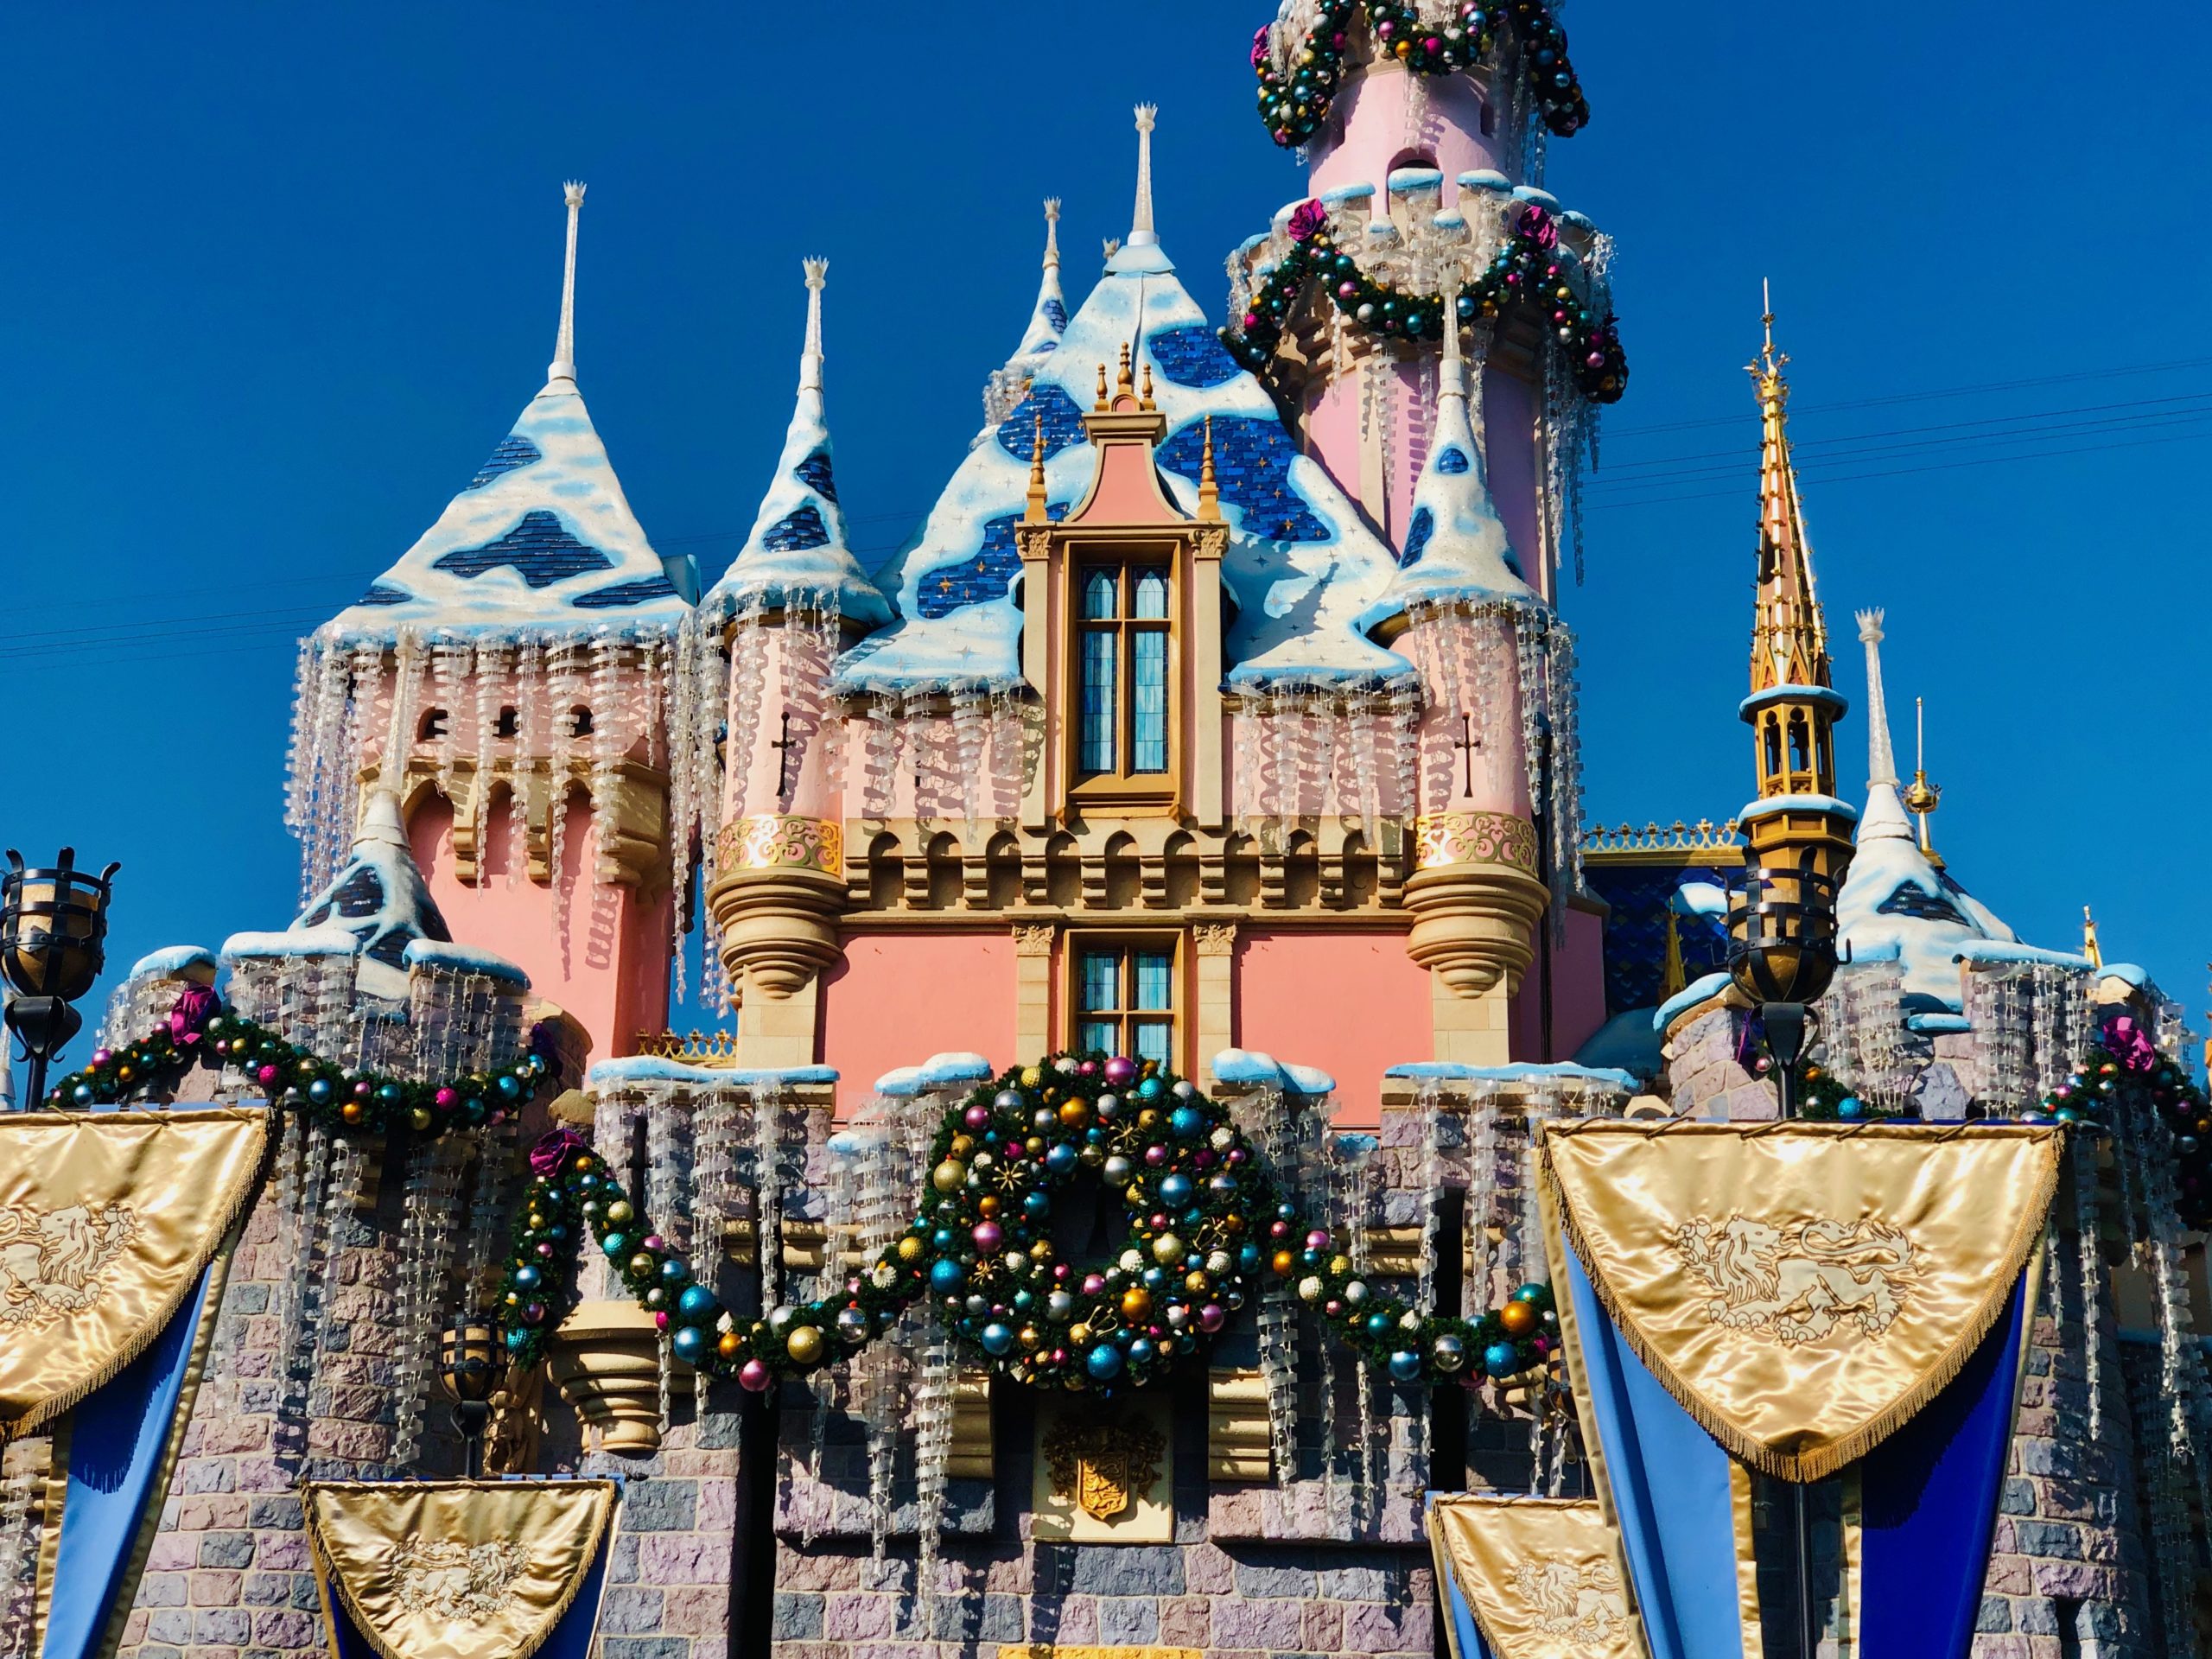 When Does Disneyland Decorate For Christmas? - A Disney